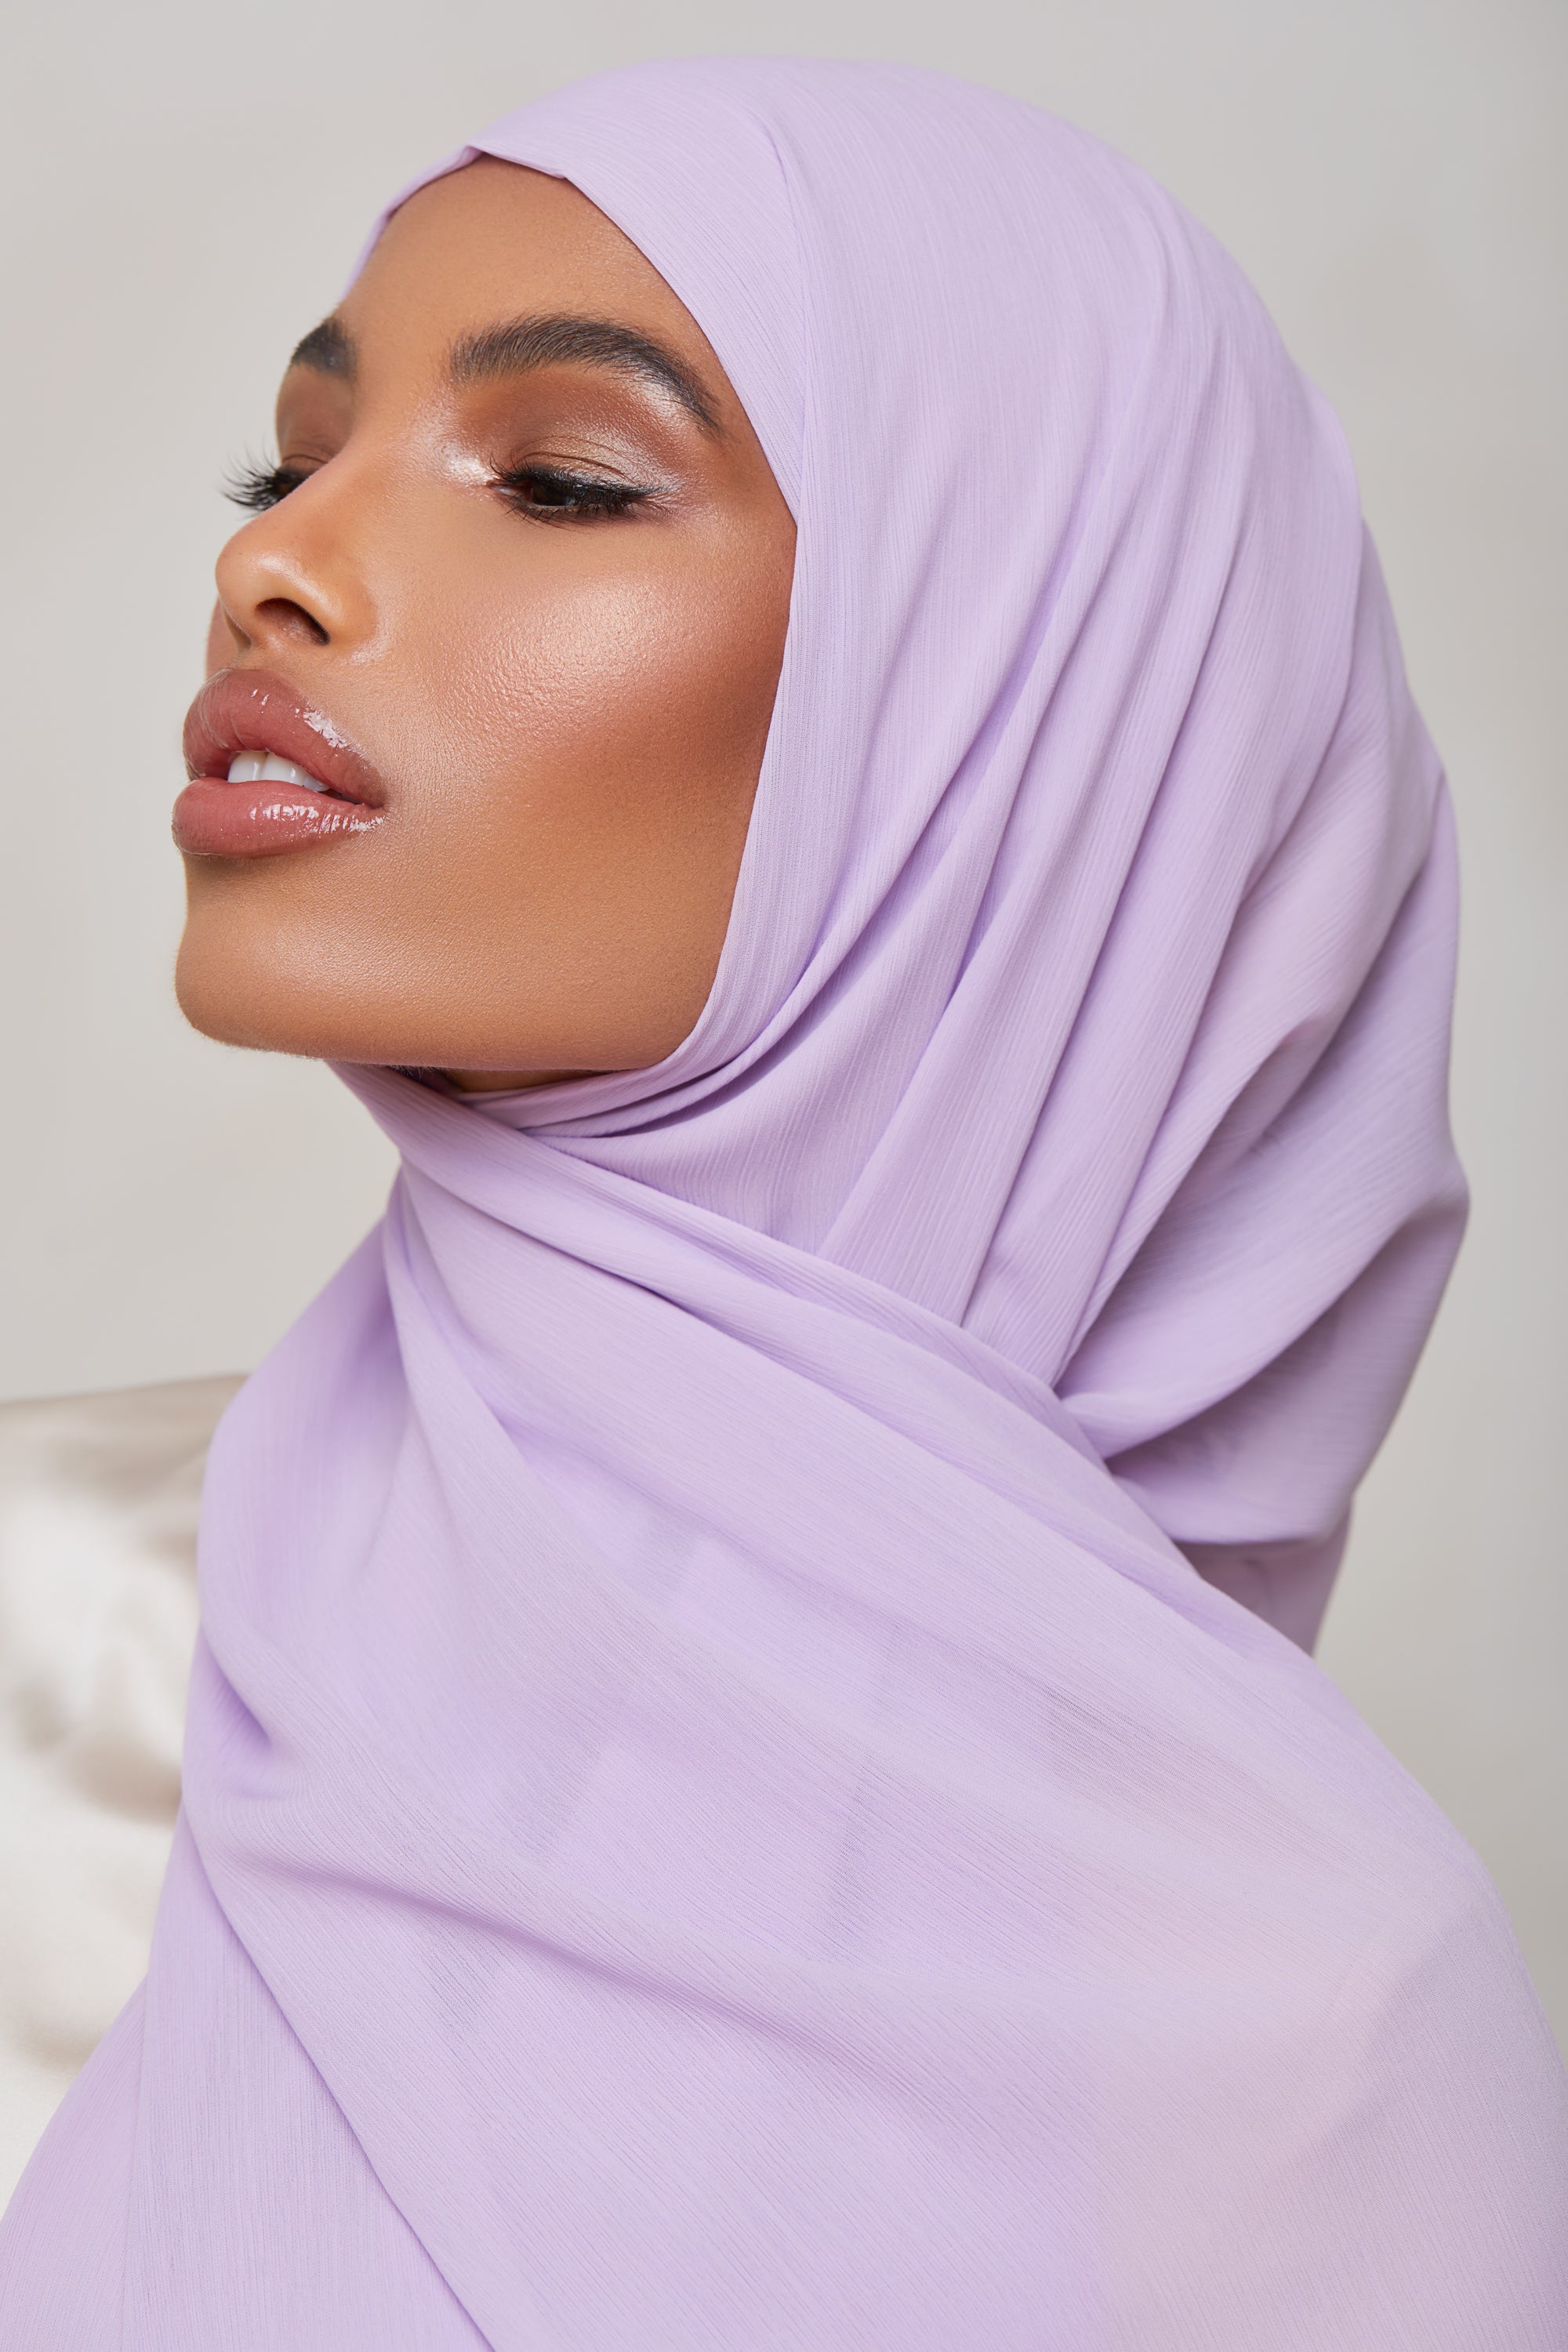 Georgette Crepe Hijab - Lilac Glaze Veiled Collection 